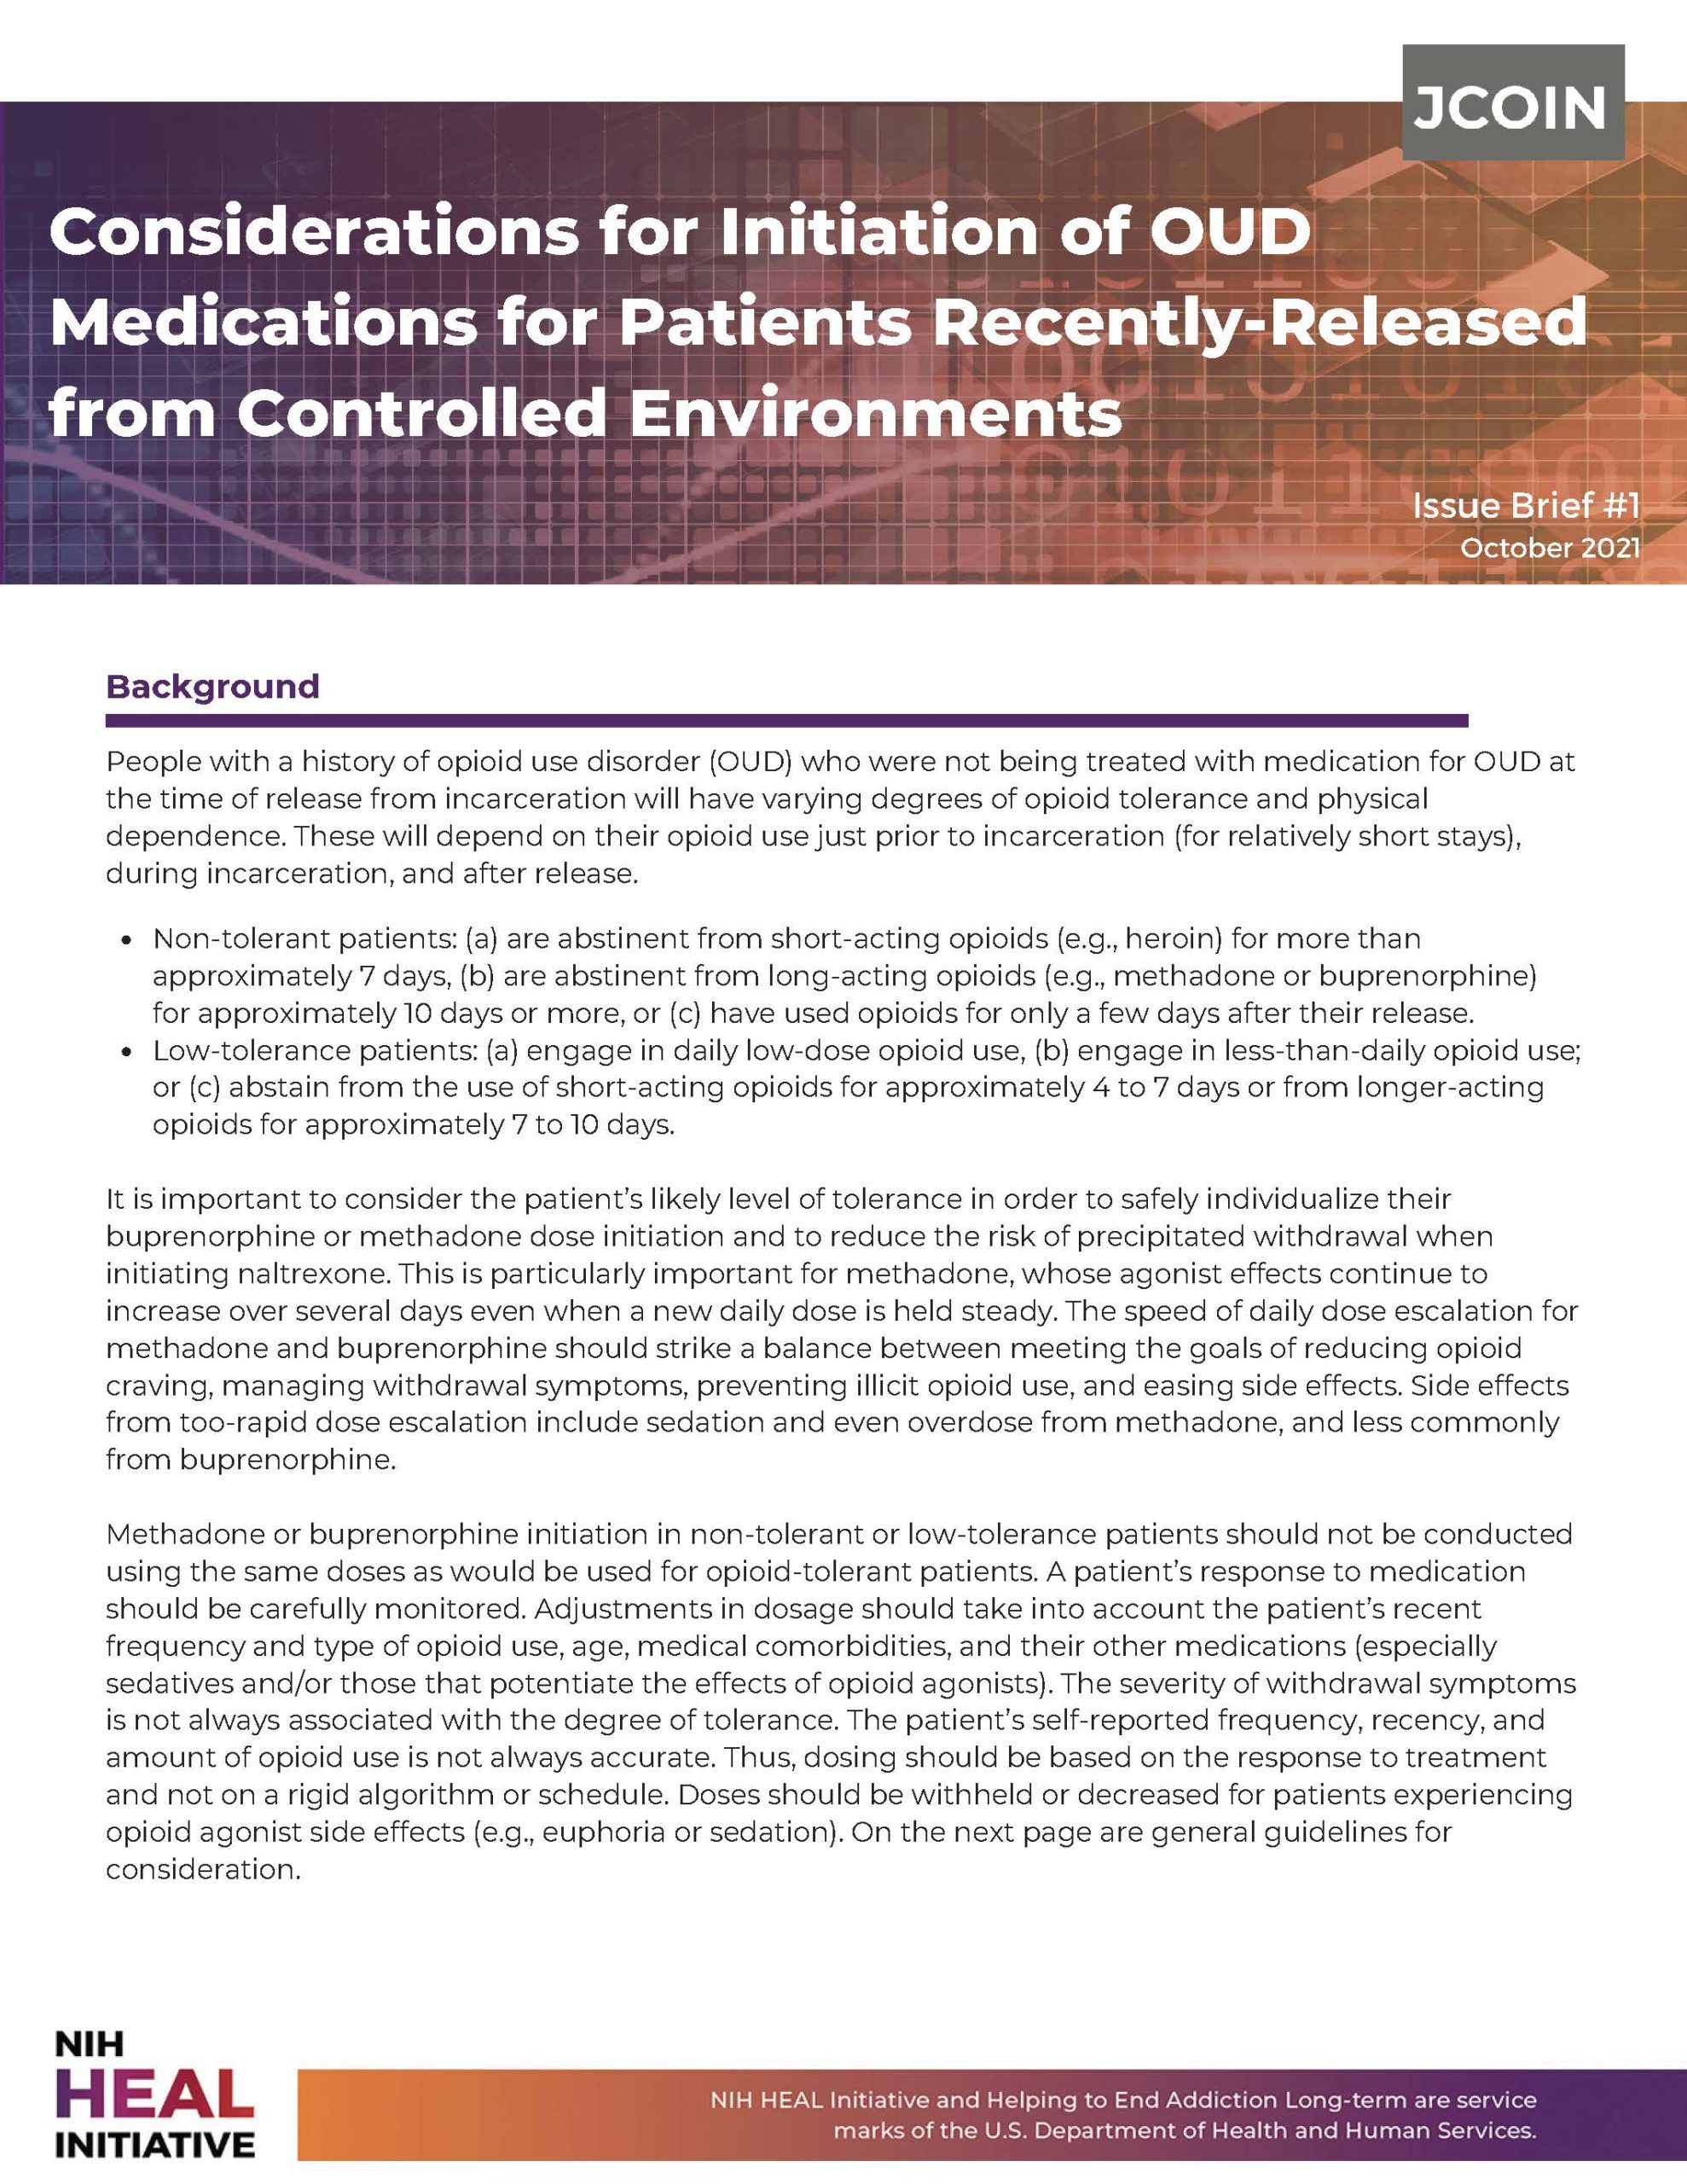 Considerations for Initiation of OUD Medications for Patients Recently-released from Controlled Environments